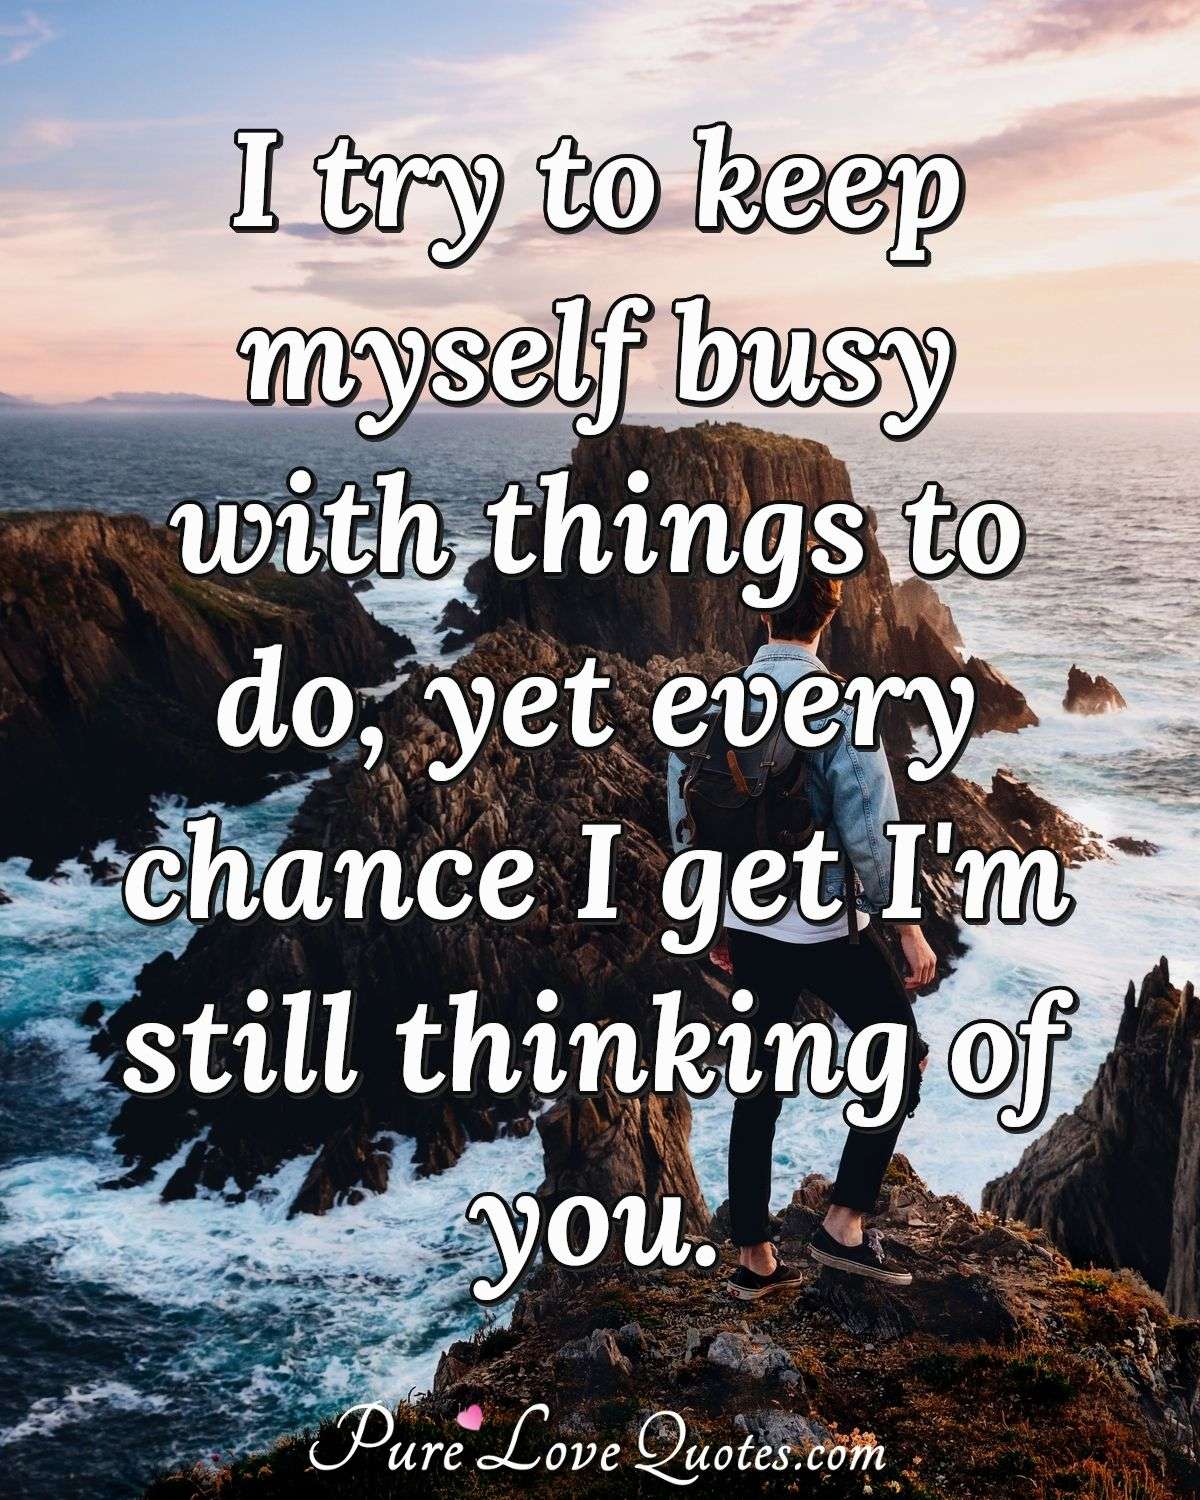 I try to keep myself busy with things to do, yet every chance I get I'm still thinking of you. - Anonymous